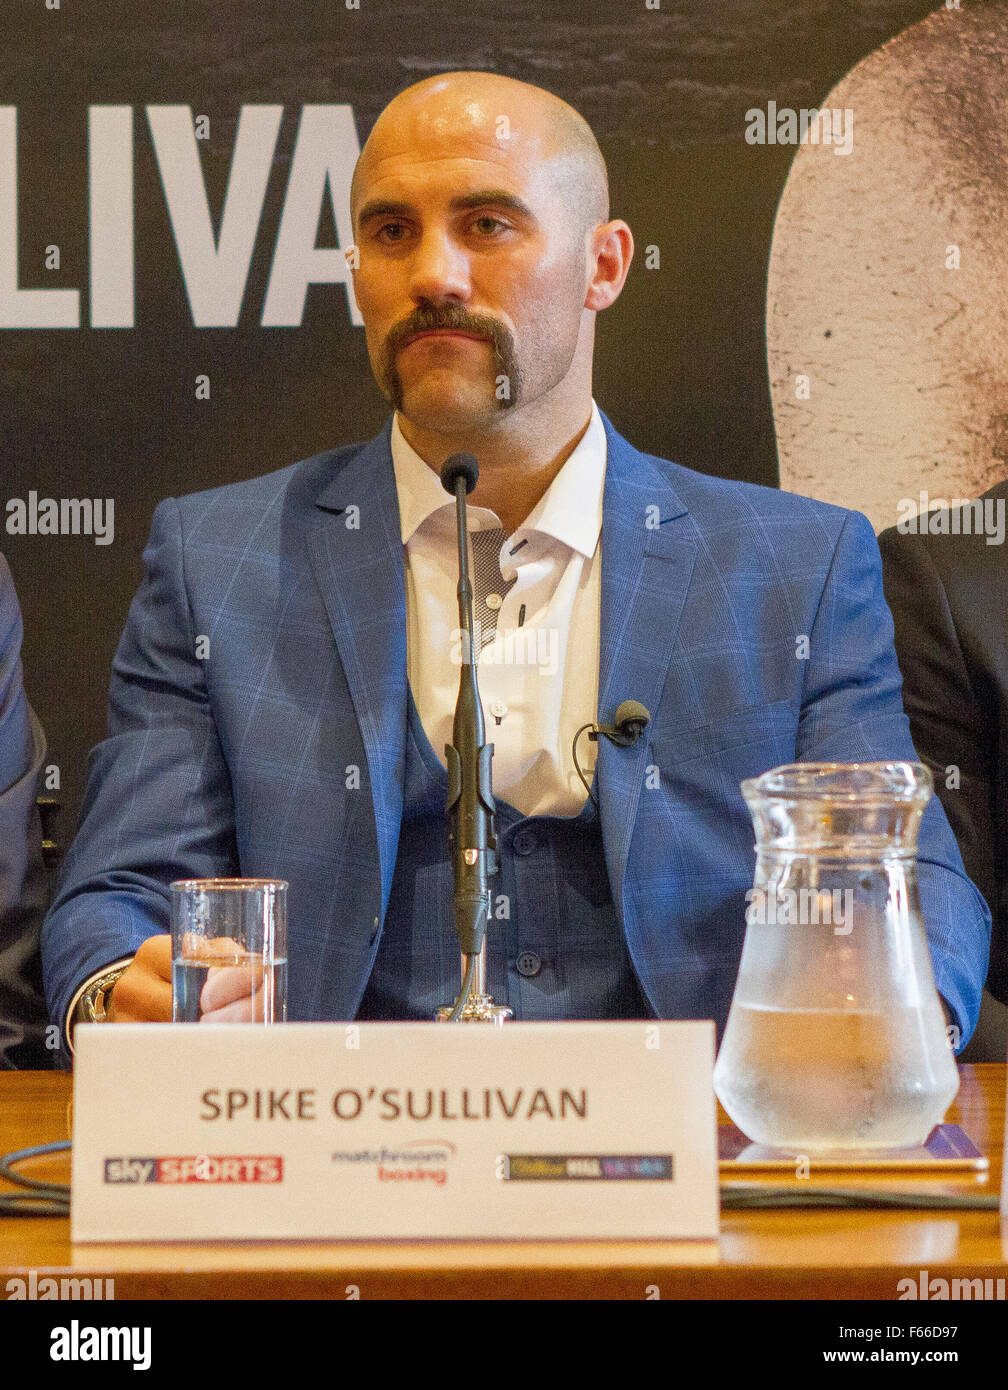 London, UK. 12th November 2015. Irish Middleweight boxer Spike O'Sullivan at a press conference to promote his fight against Chris Eubank Jr on December 12th in London. Credit:  Paul McCabe/Alamy Live News Stock Photo